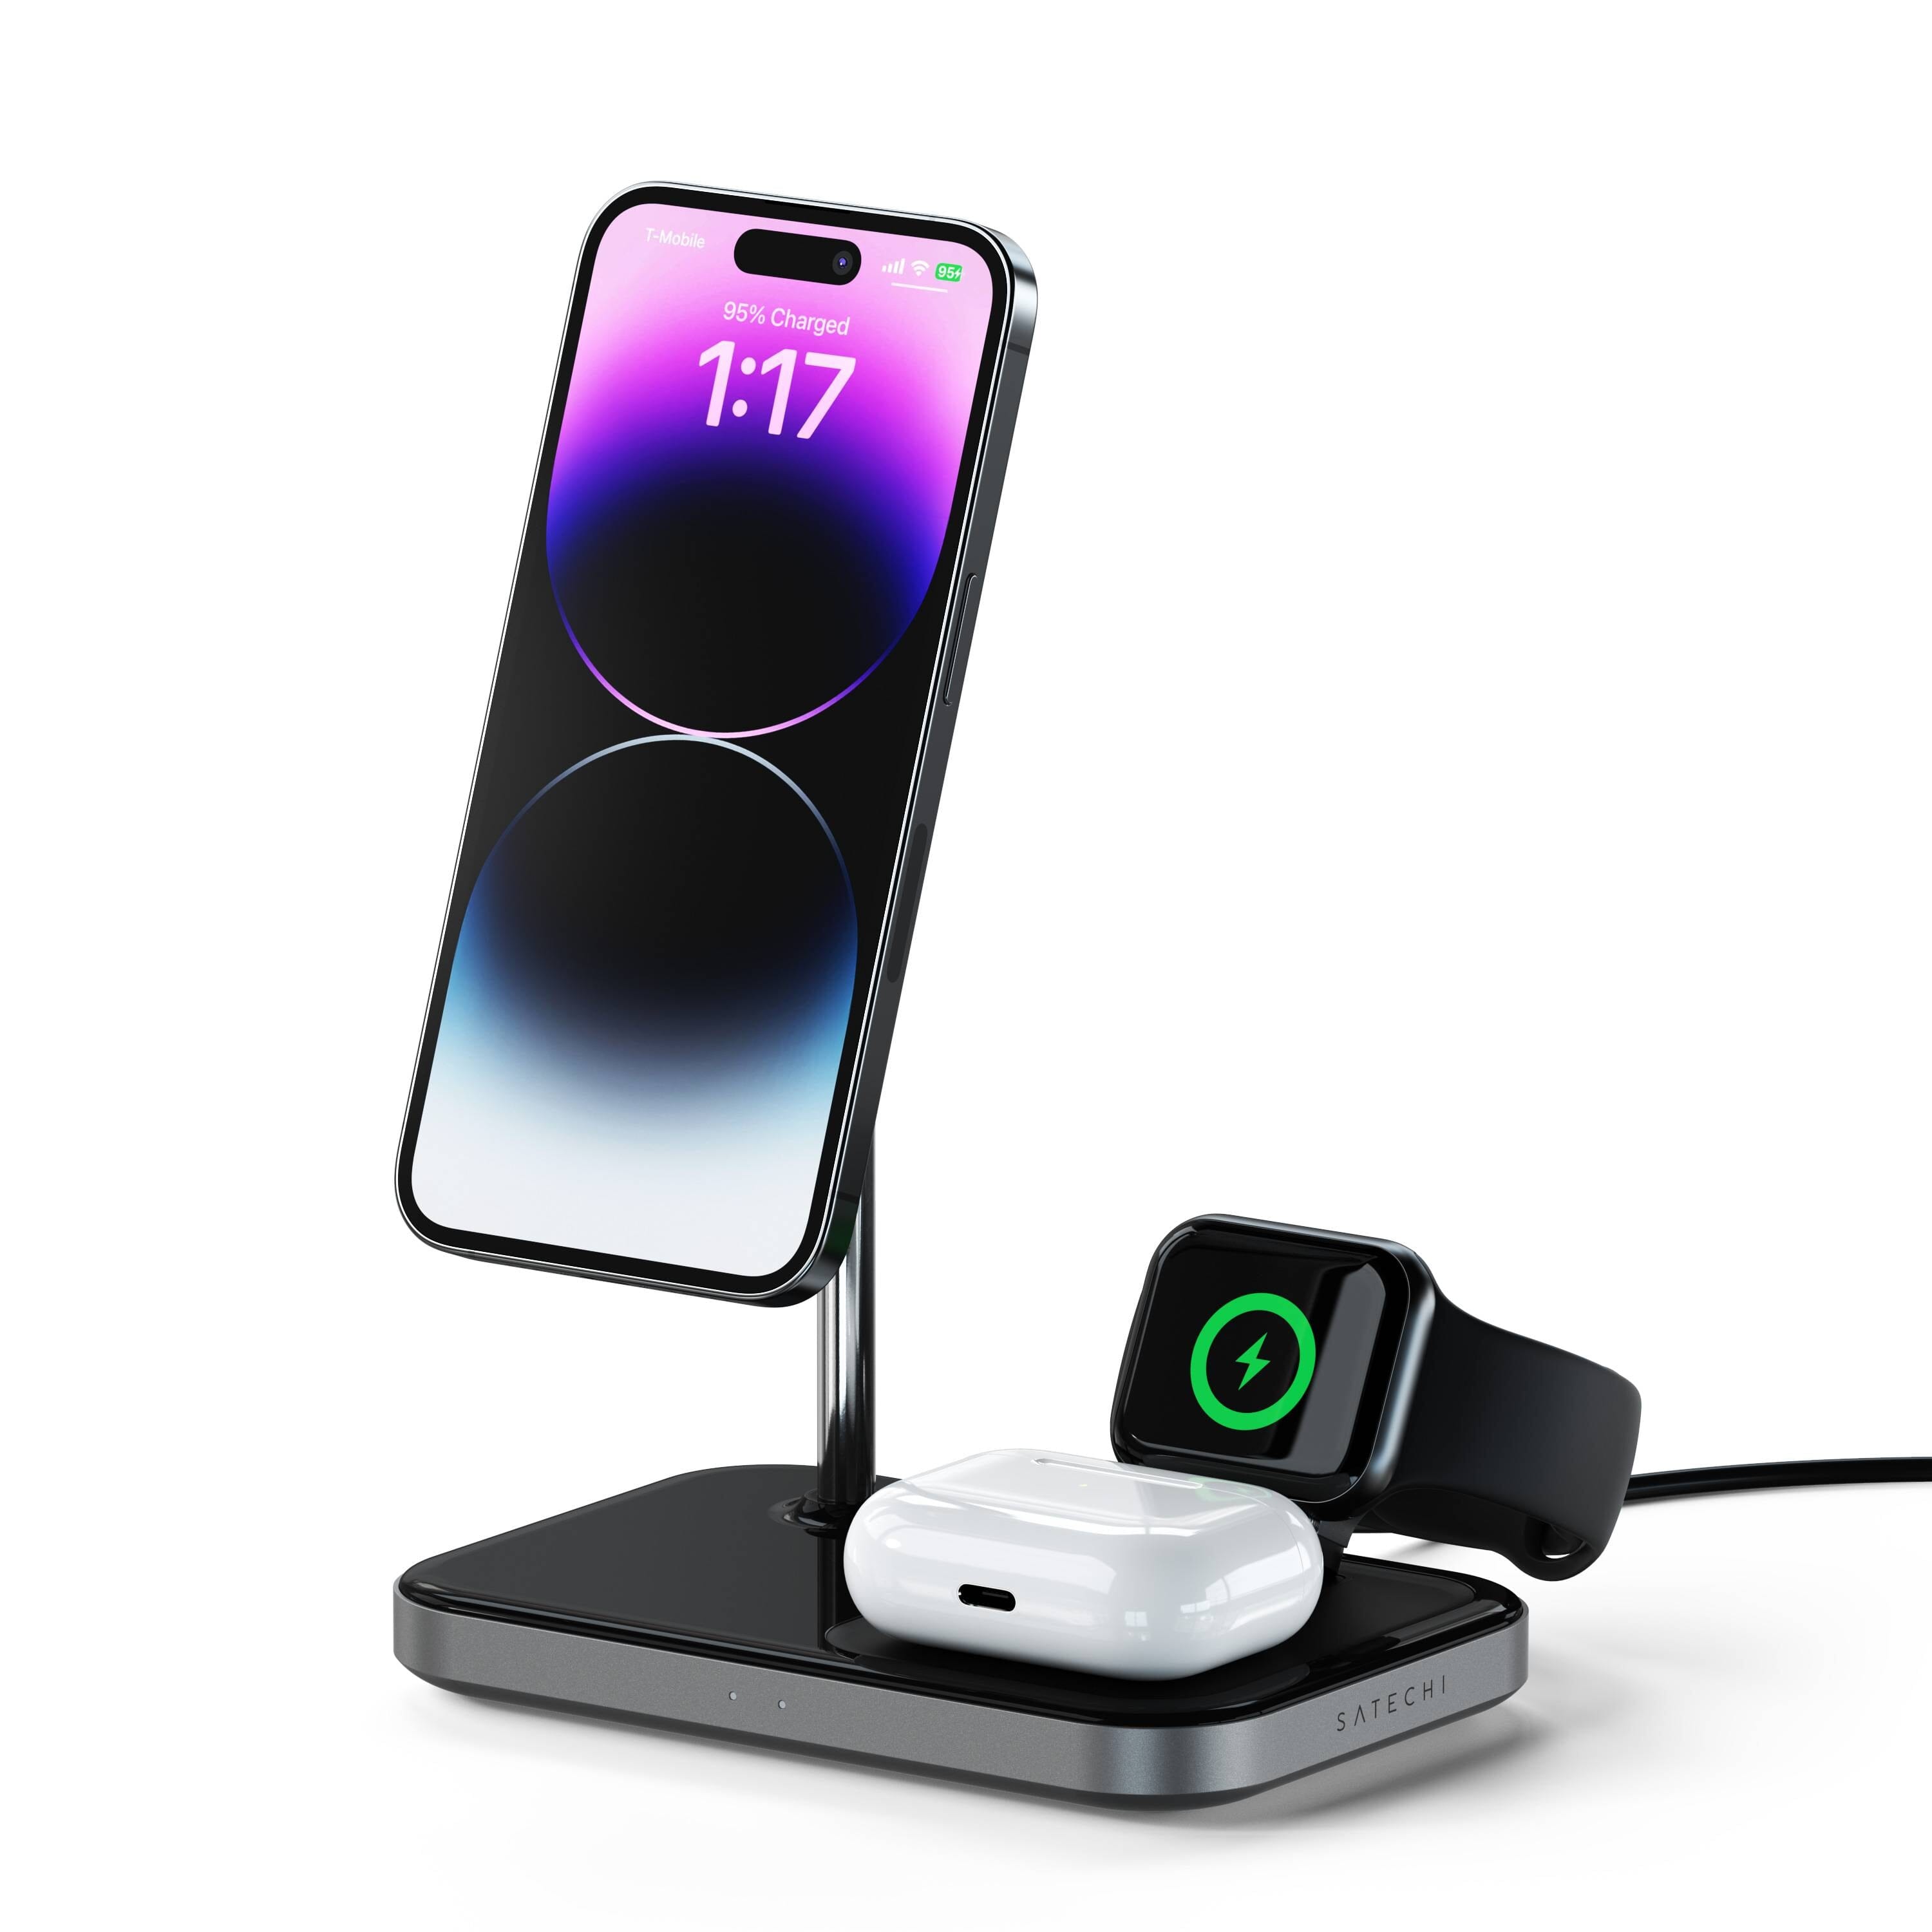 3-in-1 Magnetic Wireless Charging Stand Wireless Chargers Satechi